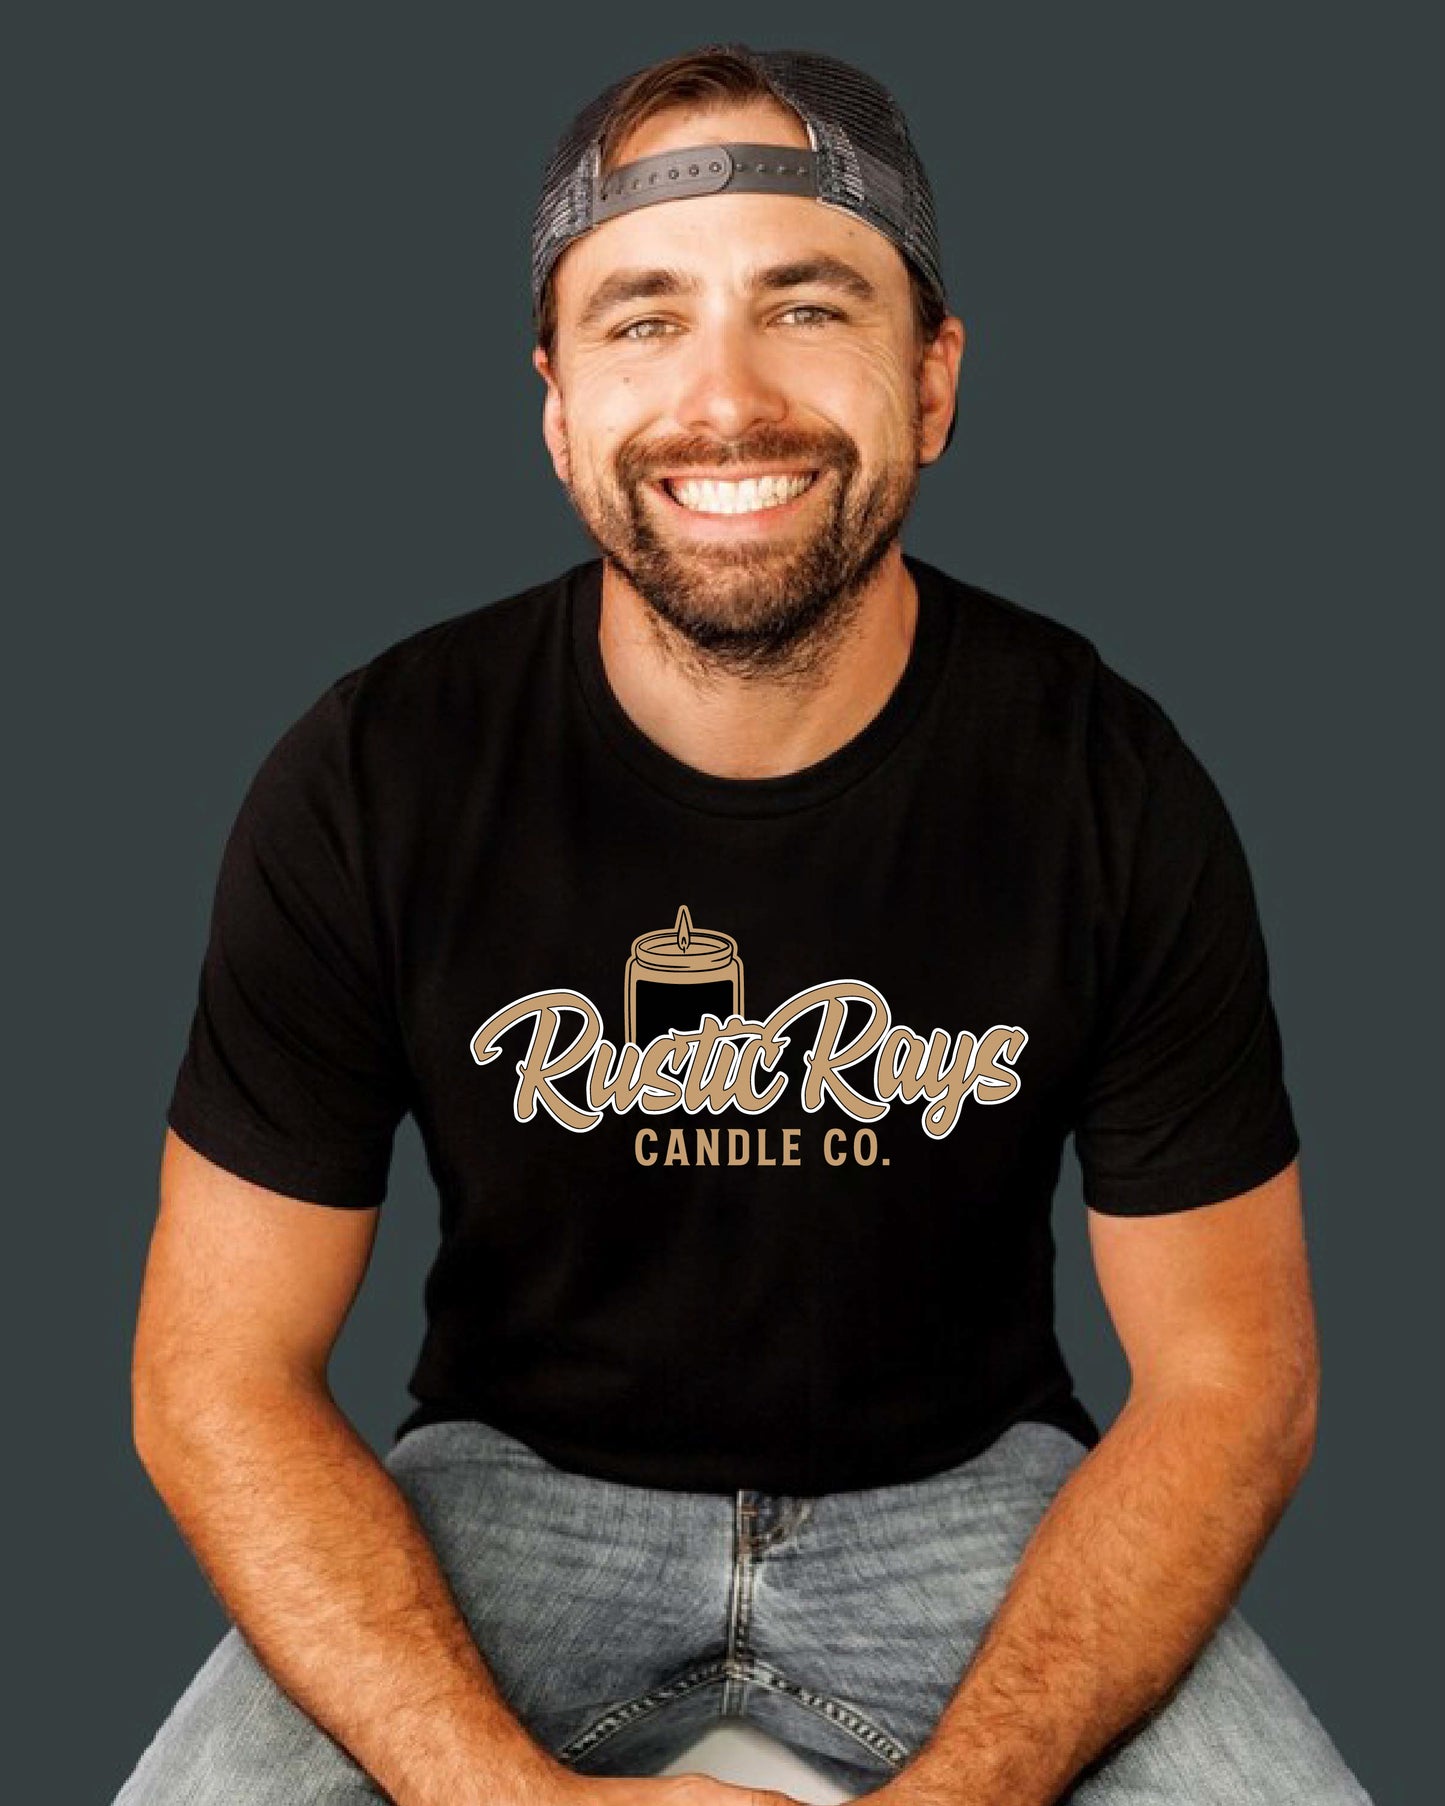 Rustic Rays Candle Co. Candle Logo Tee | Black